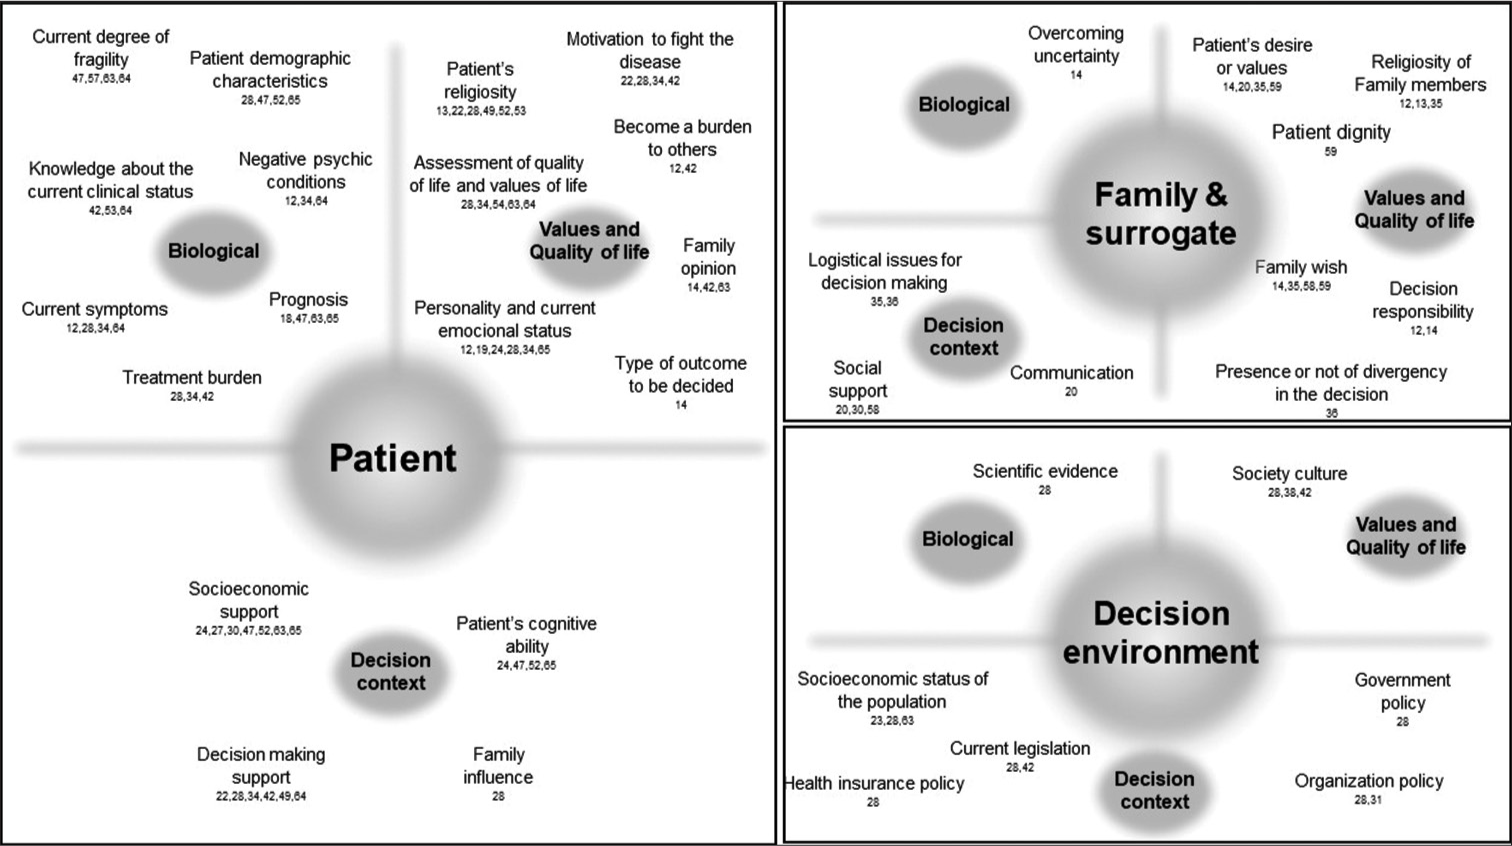 Influencing factors mosaic for patient, family, surrogate and decision environment.